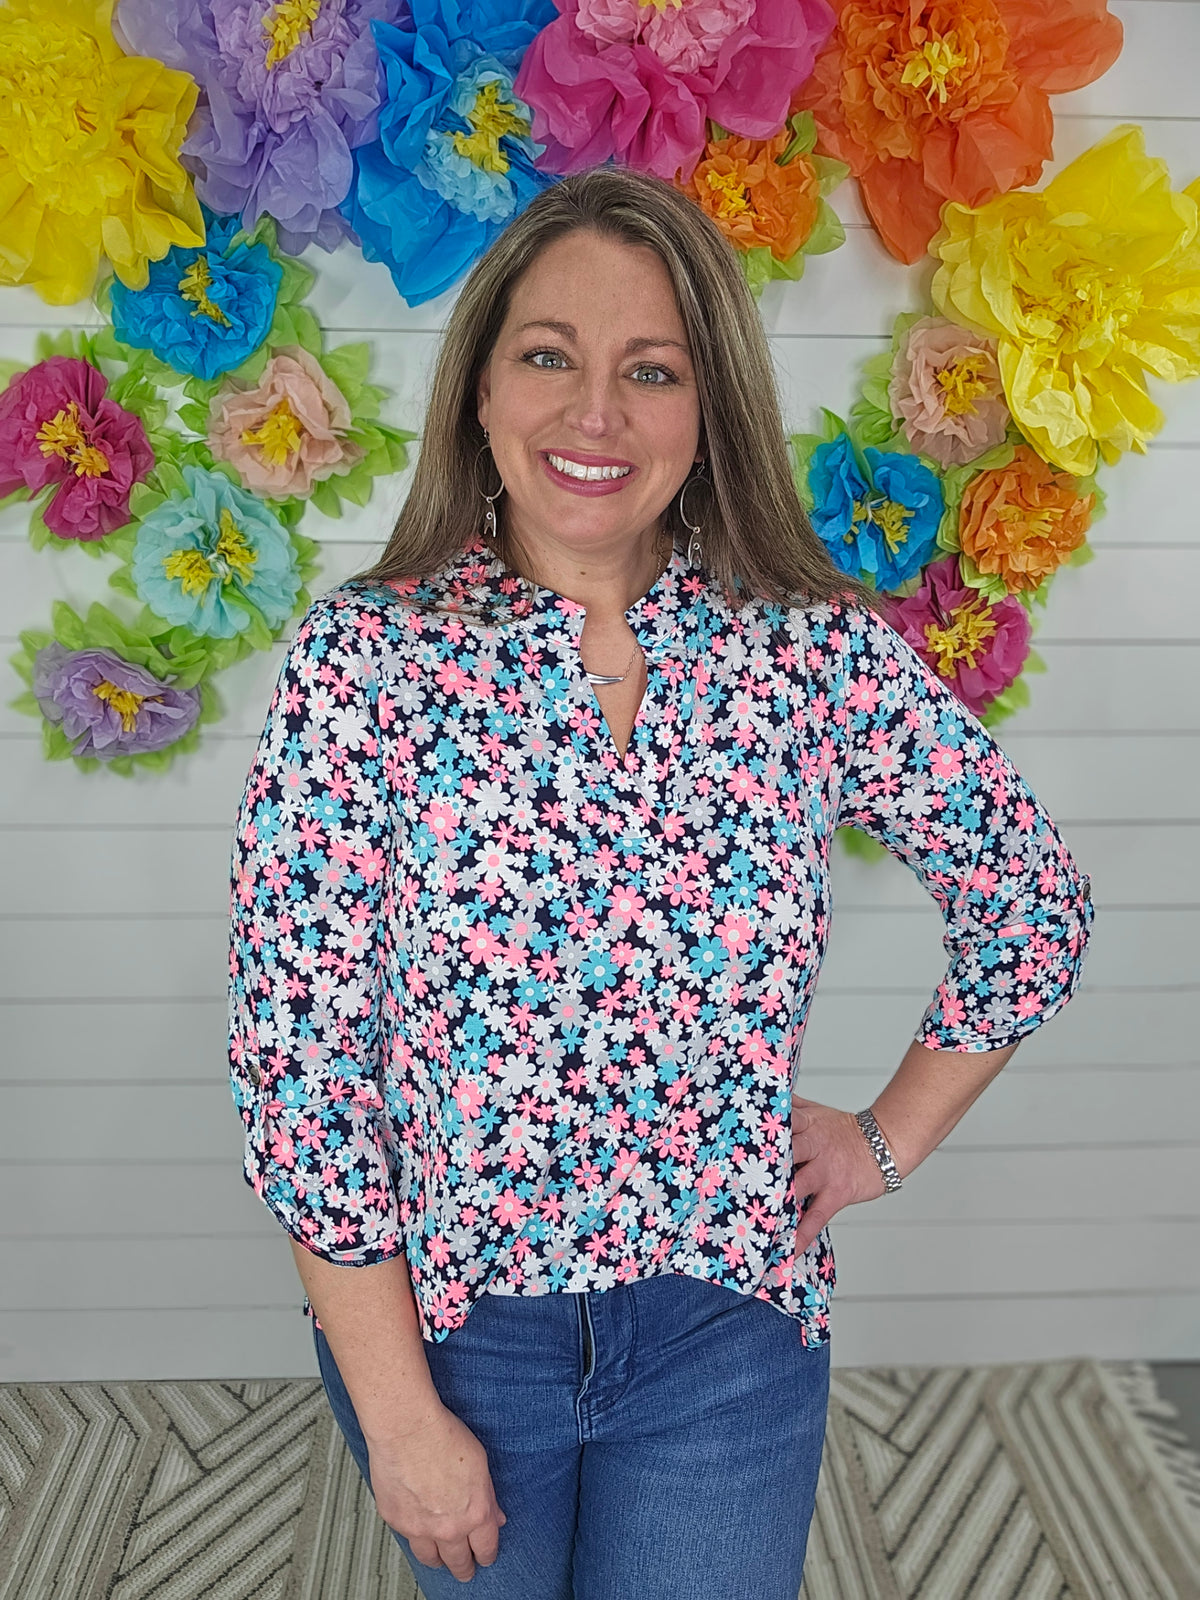 BLACK/NEON PINK/MINT FLORAL 3/4 SLEEVE LIZZY TOP